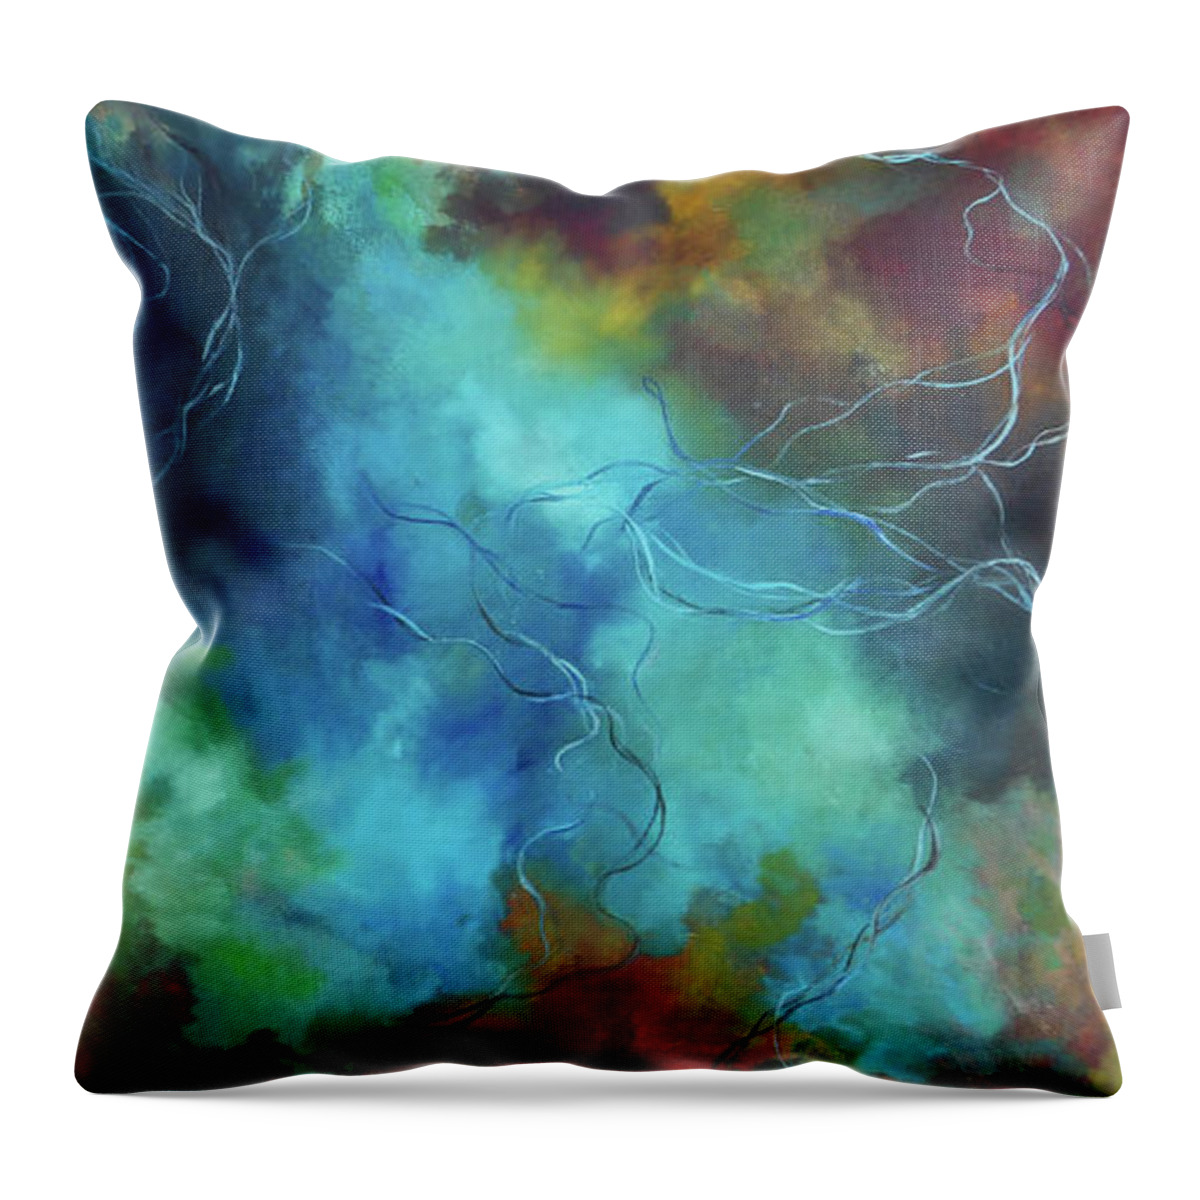 Beautiful Abstact Art Throw Pillow featuring the painting Whispering Winds by Karen Kennedy Chatham